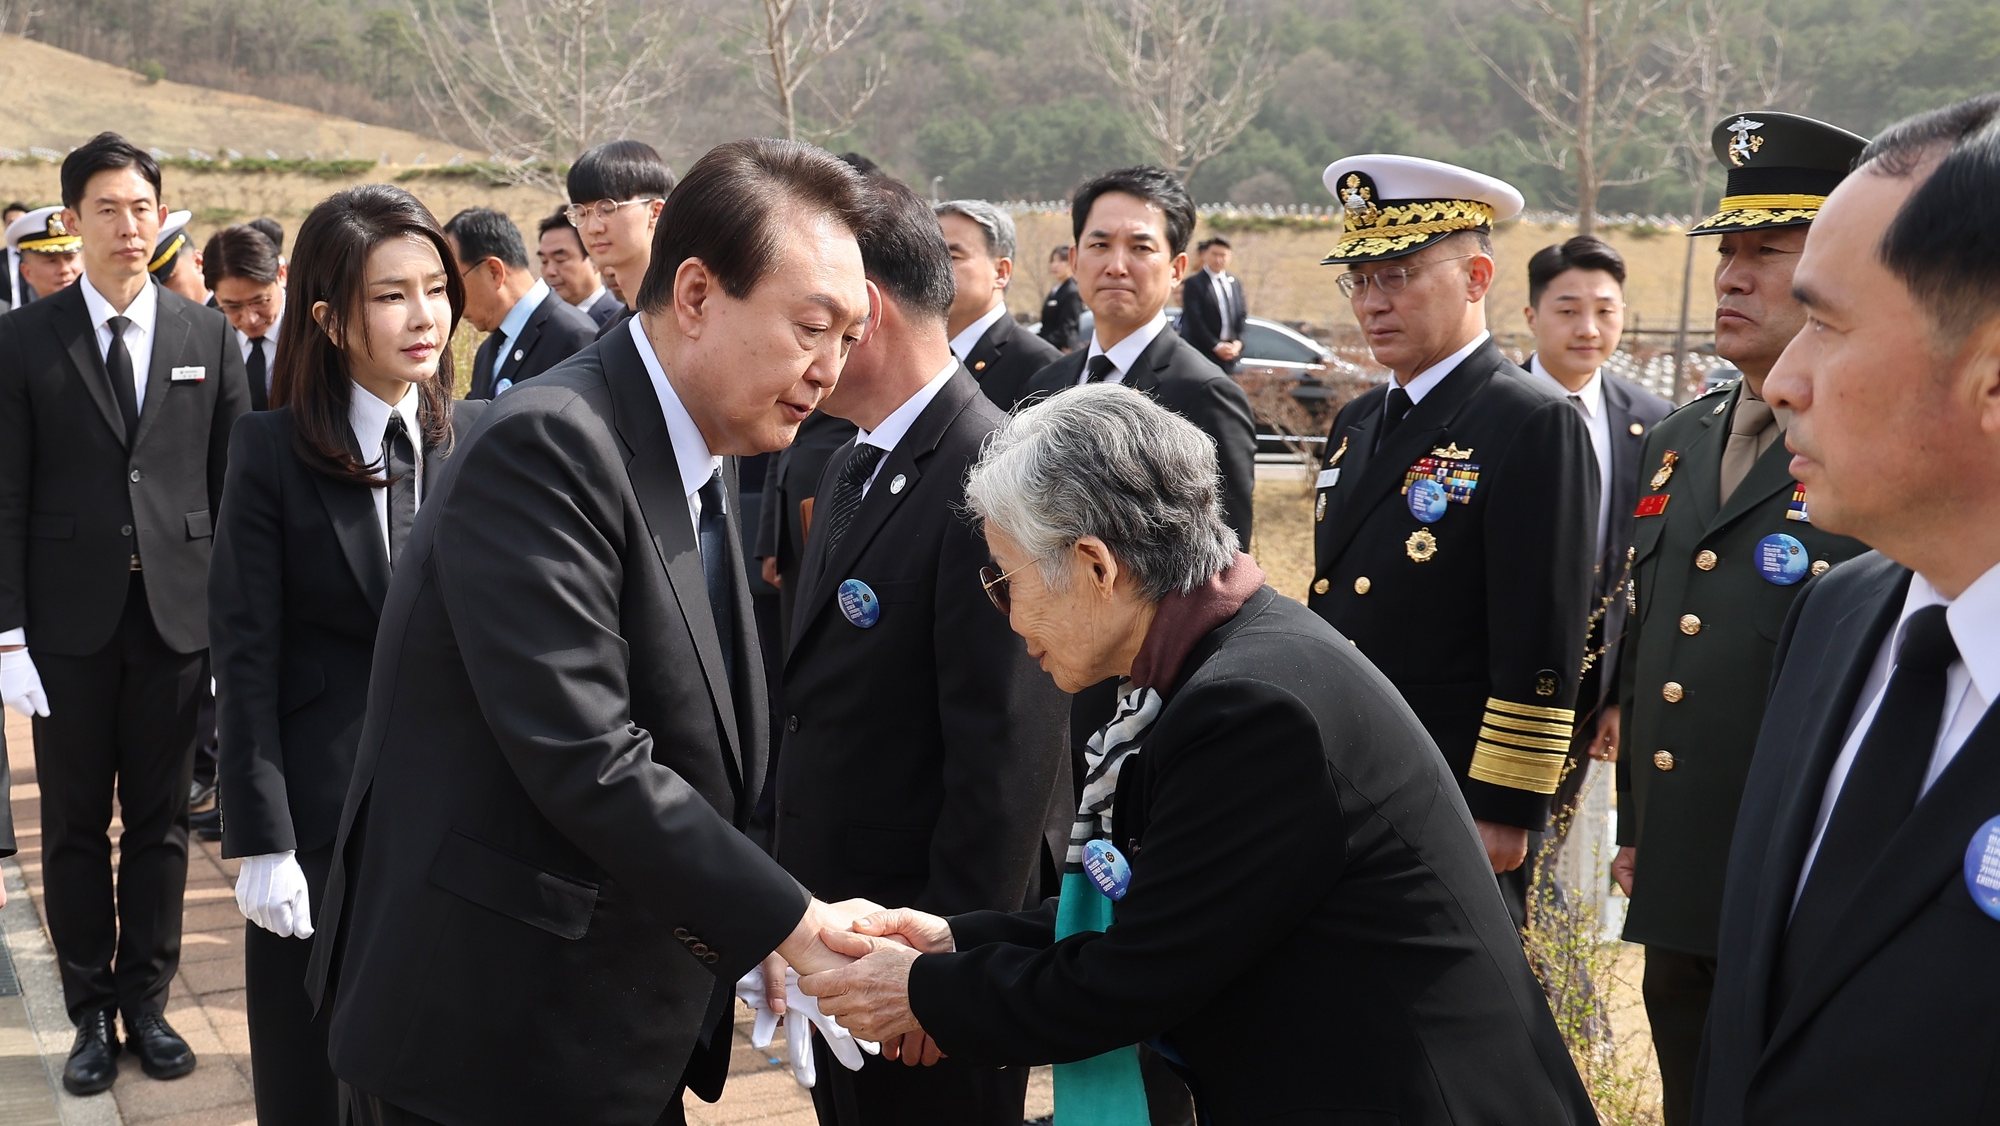 epa10539827 South Korean President Yoon Suk Yeol (C-L) greets bereaved family members of the victims of inter-Korean naval clashes during a ceremony at a national cemetery in Daejeon, South Korea, 24 March 2023. The ceremony marks the eighth anniversary of the commemoration day for 55 troops who died in three major clashes with North Korea in the West Sea, comprising an inter-Korean naval skirmish in 2002, North Korea&#039;s torpedo attack on the corvette Cheonan in 2010 and its shelling of the border island of Yeonpyeong in the same year. Since 2016, the government has designated the fourth Friday of March as a commemoration day, known as West Sea Defense Day.  EPA/YONHAP SOUTH KOREA OUT